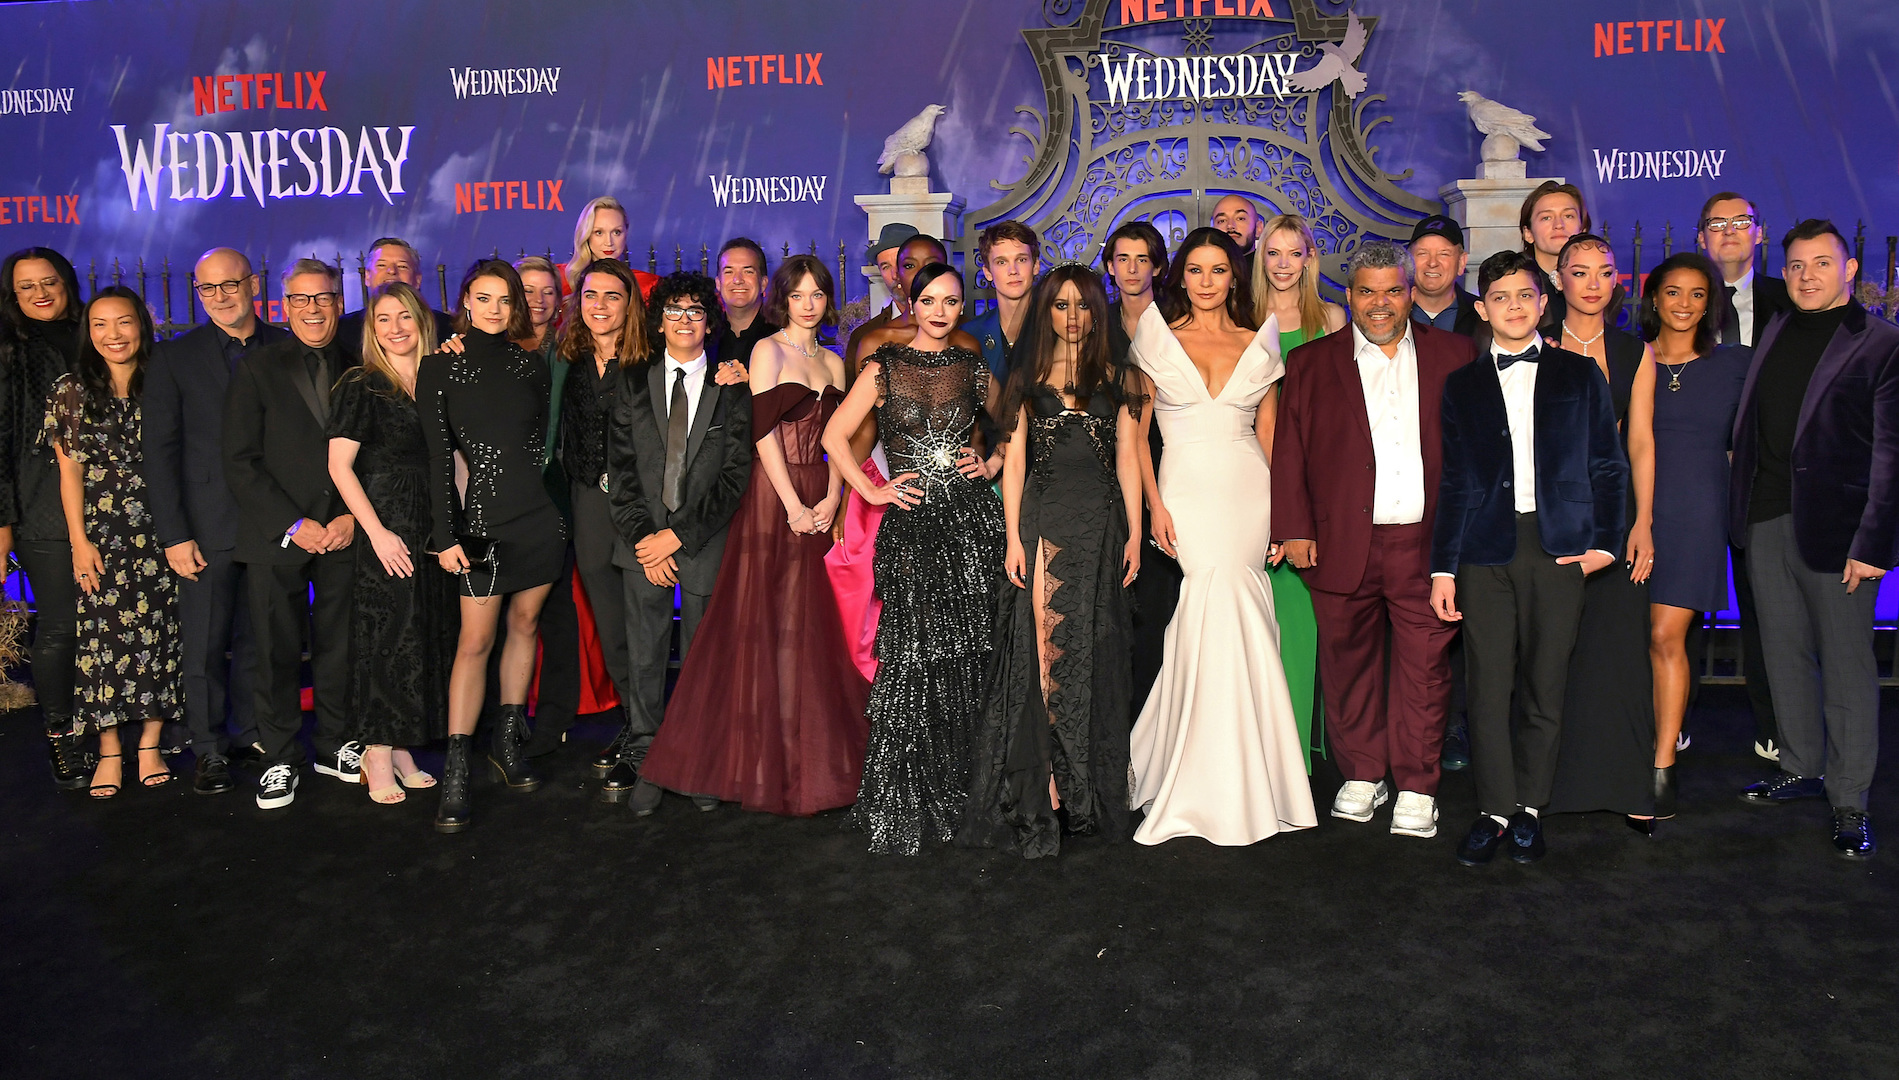 A Recap of Netflix's Wednesday Hollywood Premiere - Todo Wafi